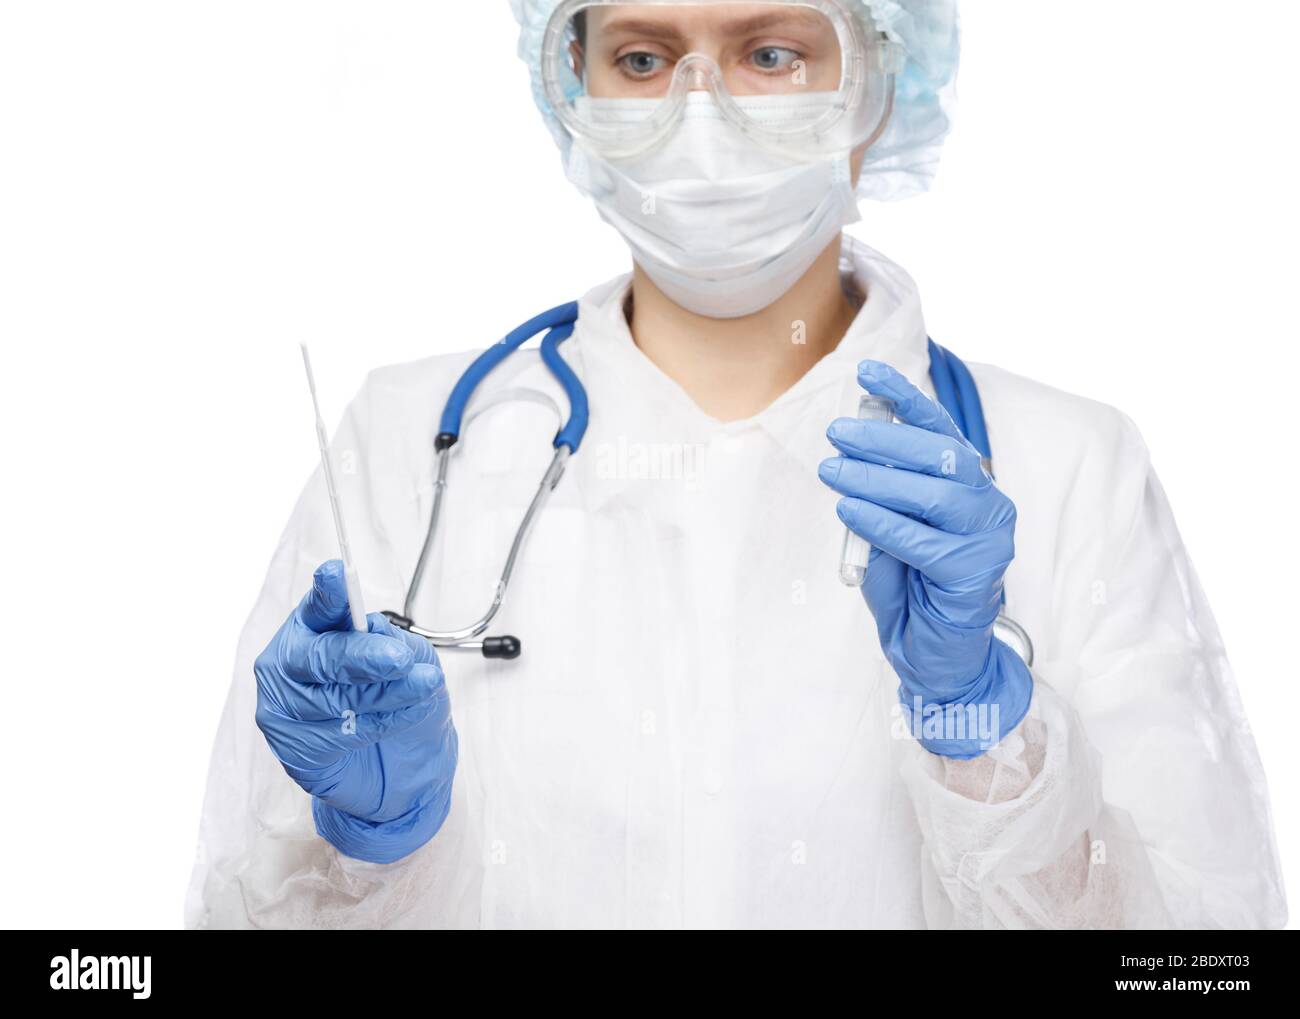 Close-up shot of doctor wearing protective suit, goggles and surgical mask ready to take saliva test sample  performing Saliva testing (Salivaomics) d Stock Photo